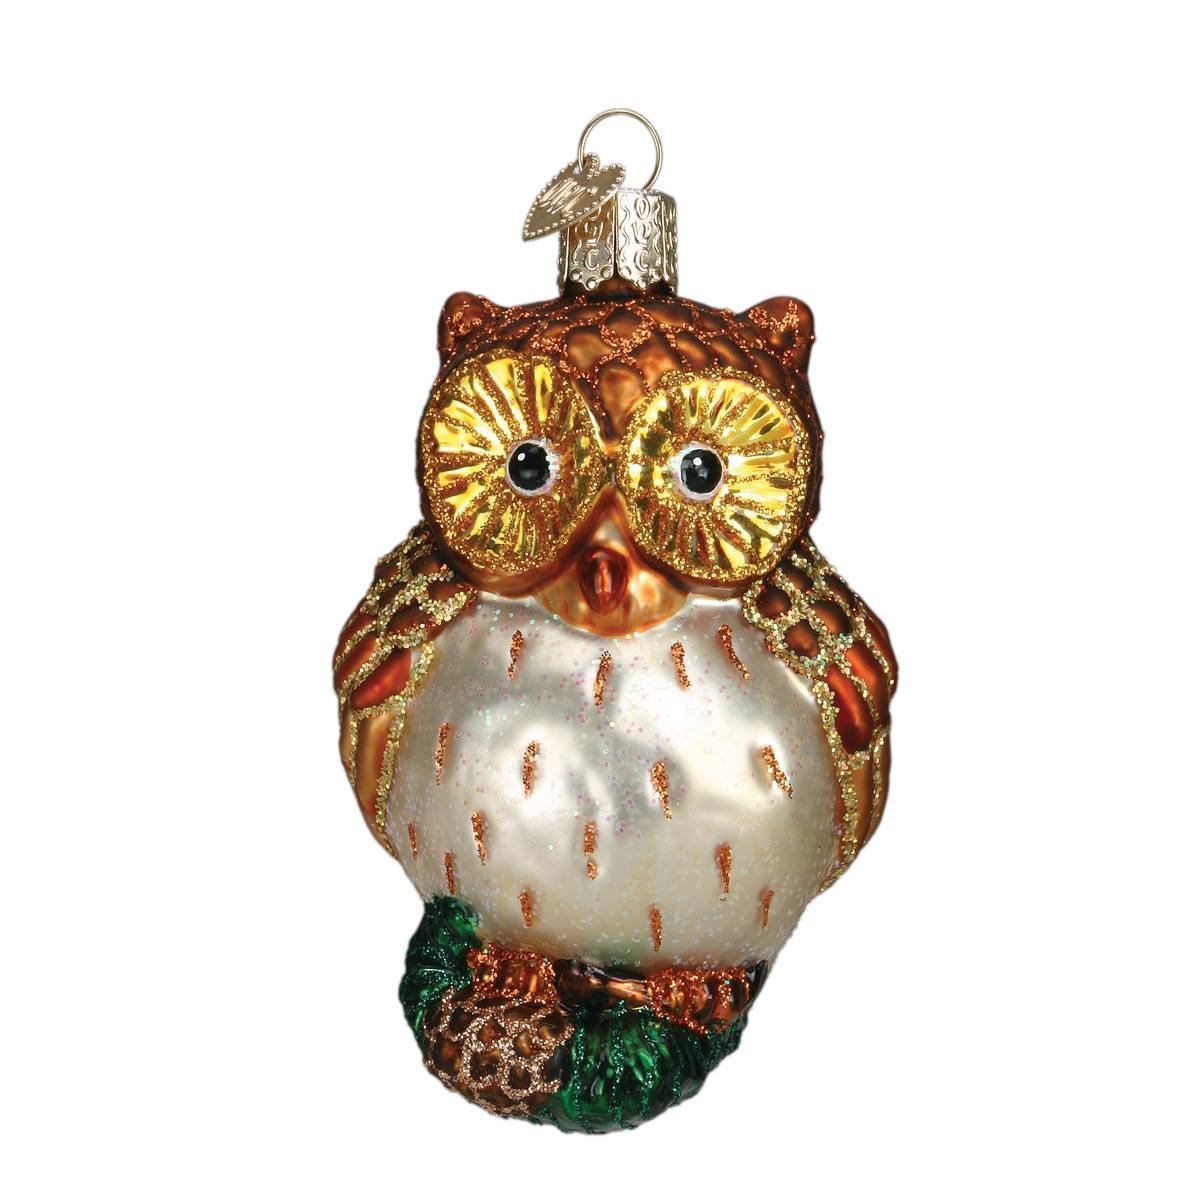 Wide-Eyed Owl Ornament